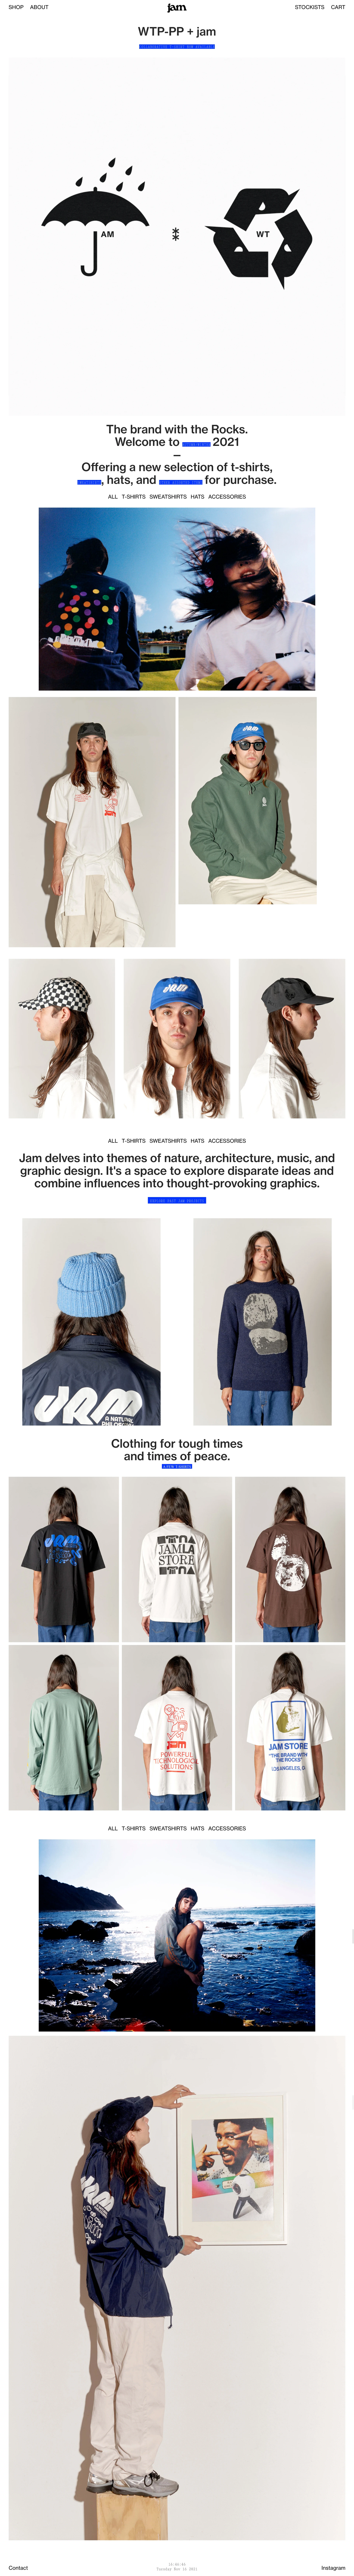 JAM Store Landing Page Example: Jam is a brand based in Los Angeles, founded in 2018. The brand is an extension of the graphic design practice of Sam Jayne. Jam delves into themes of nature, architecture, music, and graphic design. It's a space to explore disparate ideas and combine influences into thought-provoking graphics.